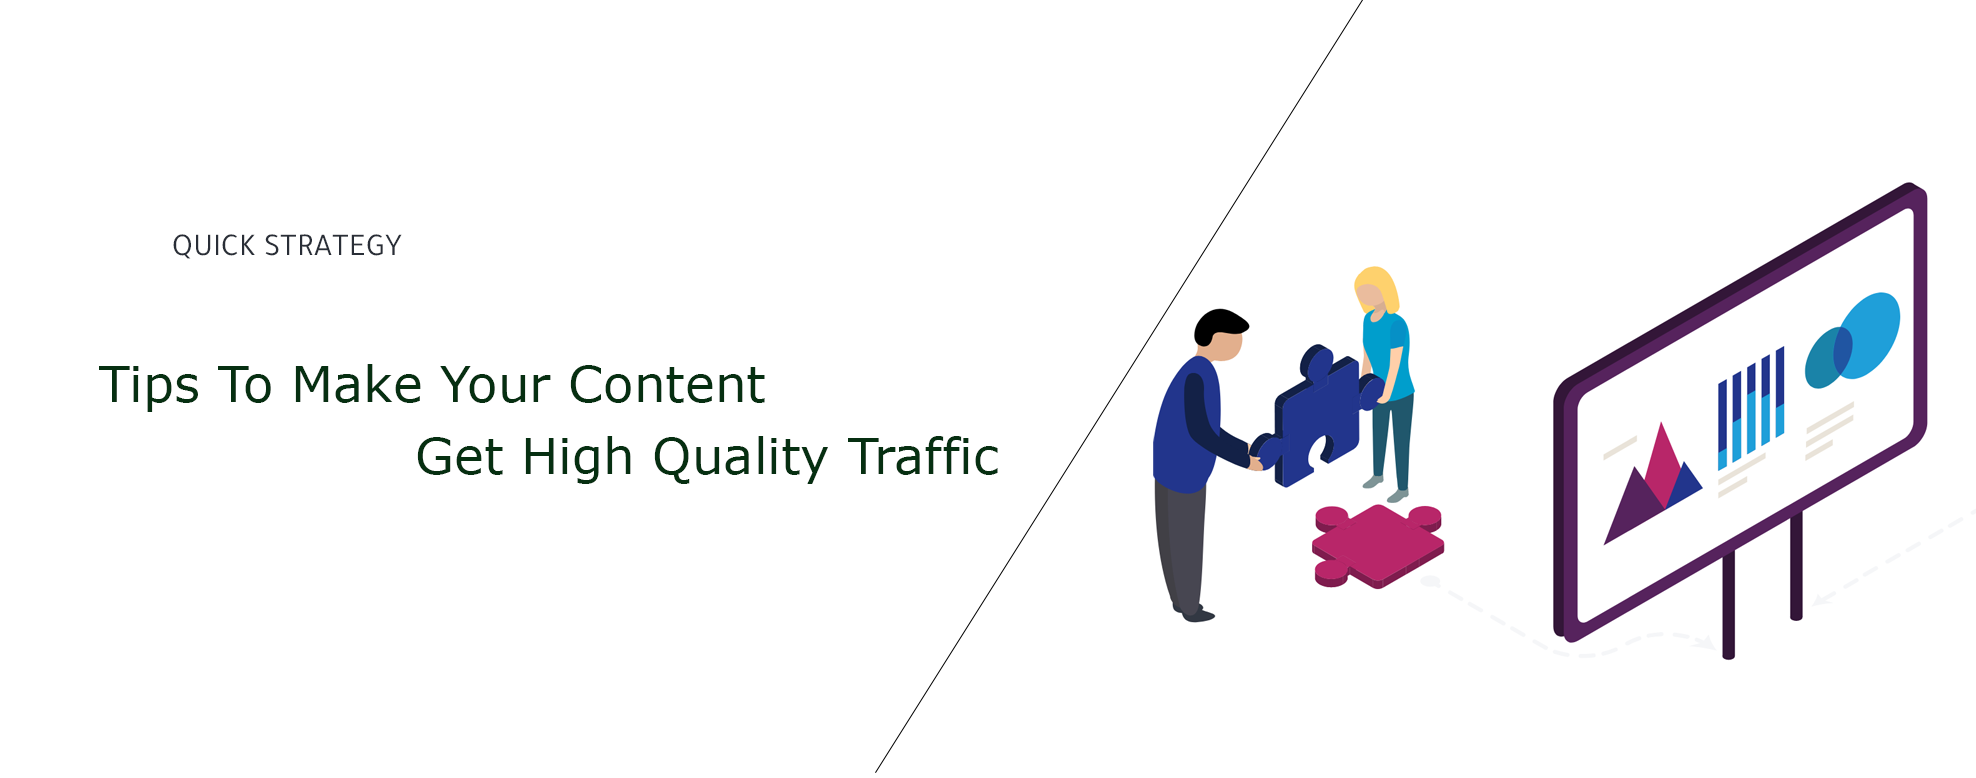 Tips To Make Your Content Get High Quality Traffic